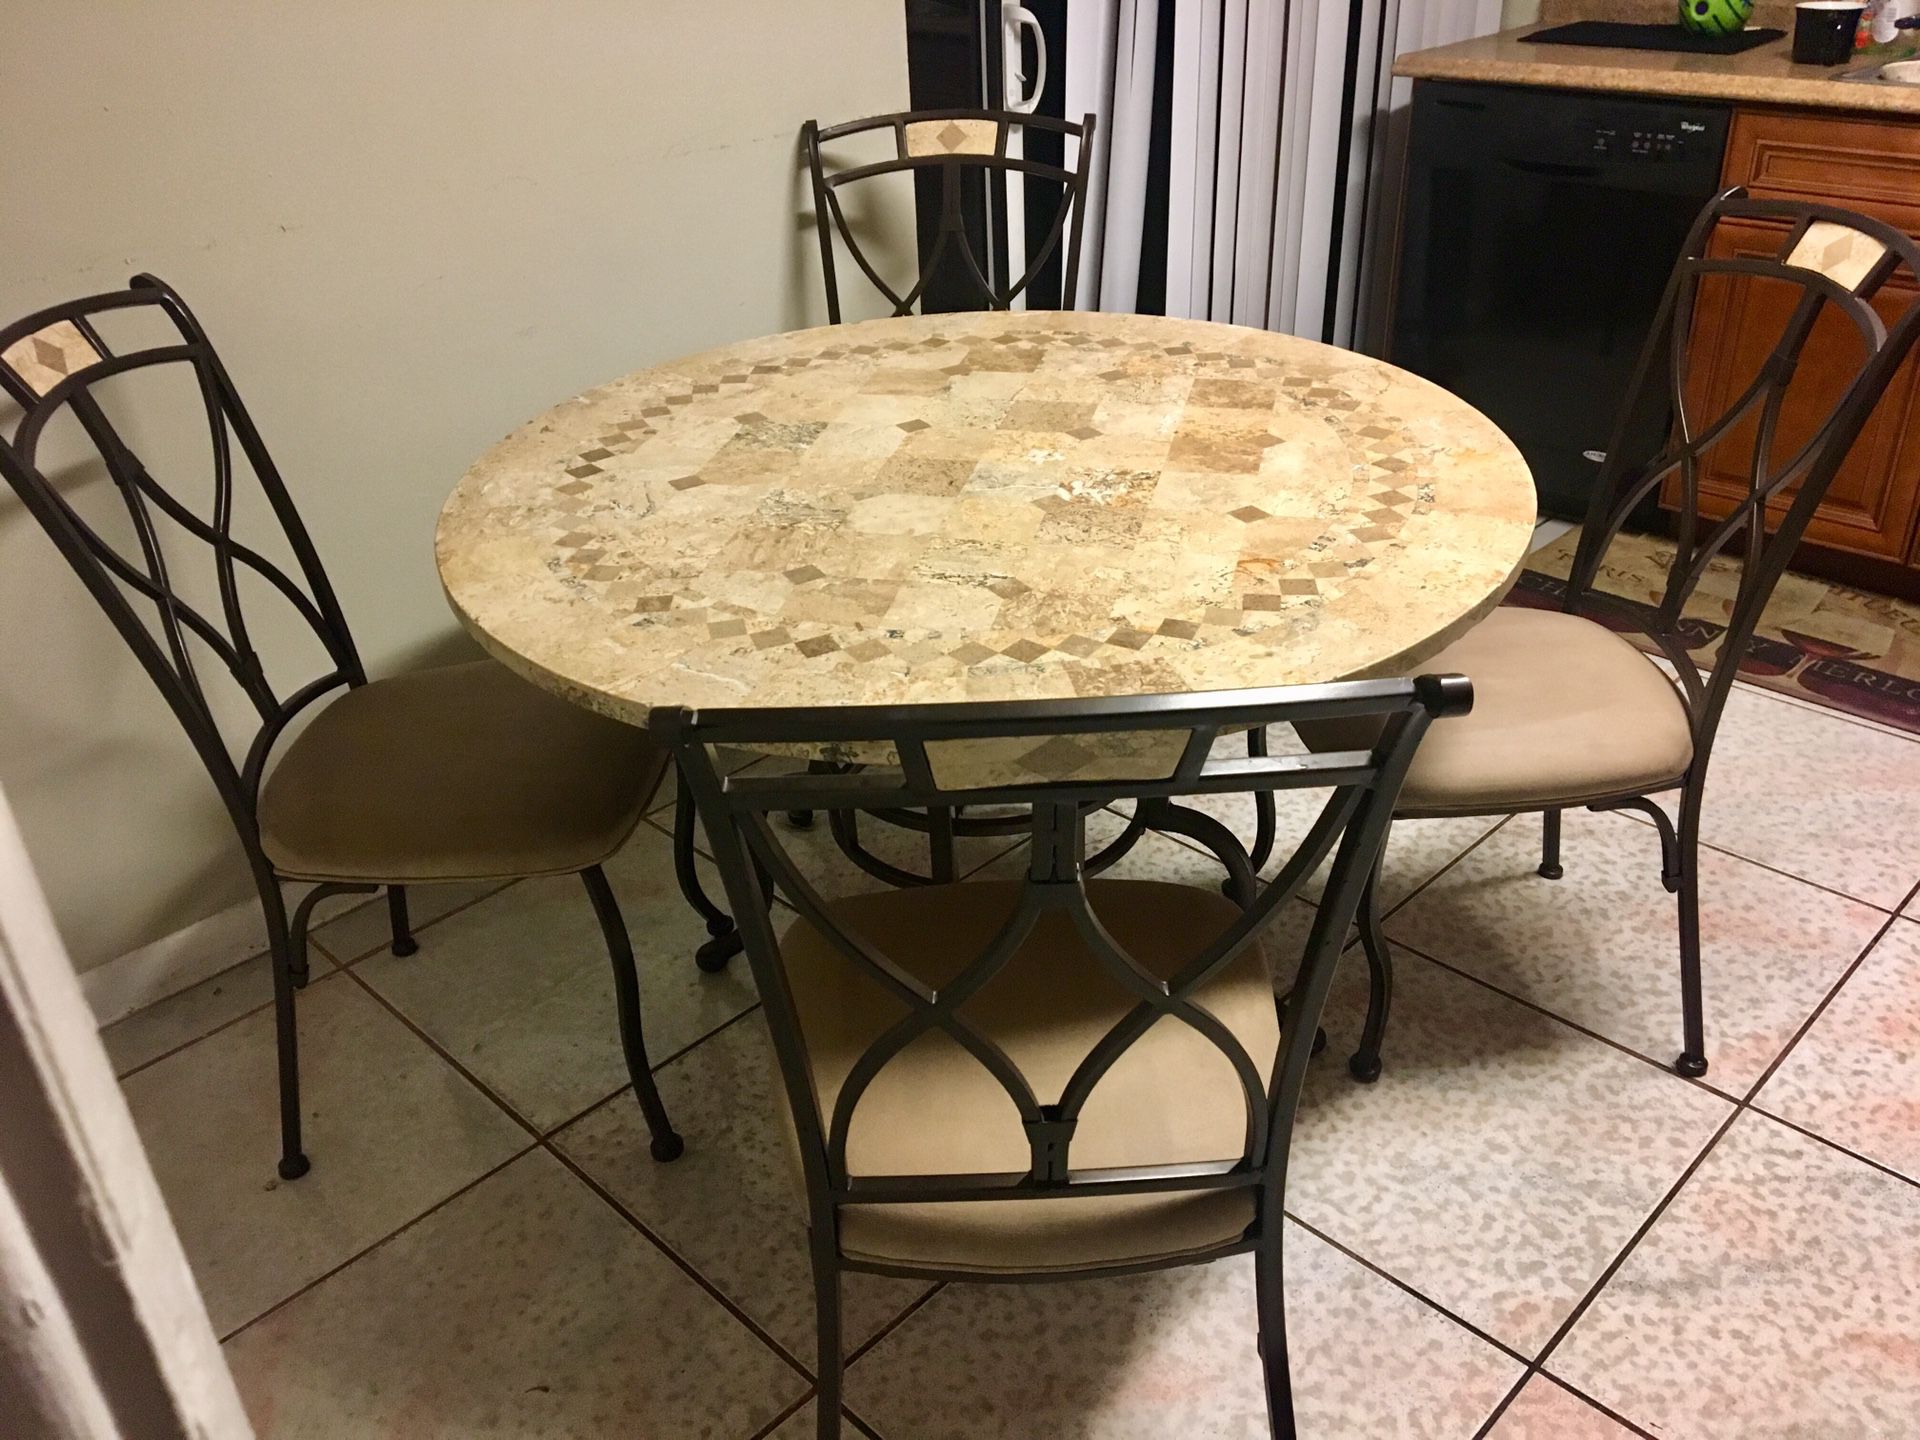 Table set with chairs